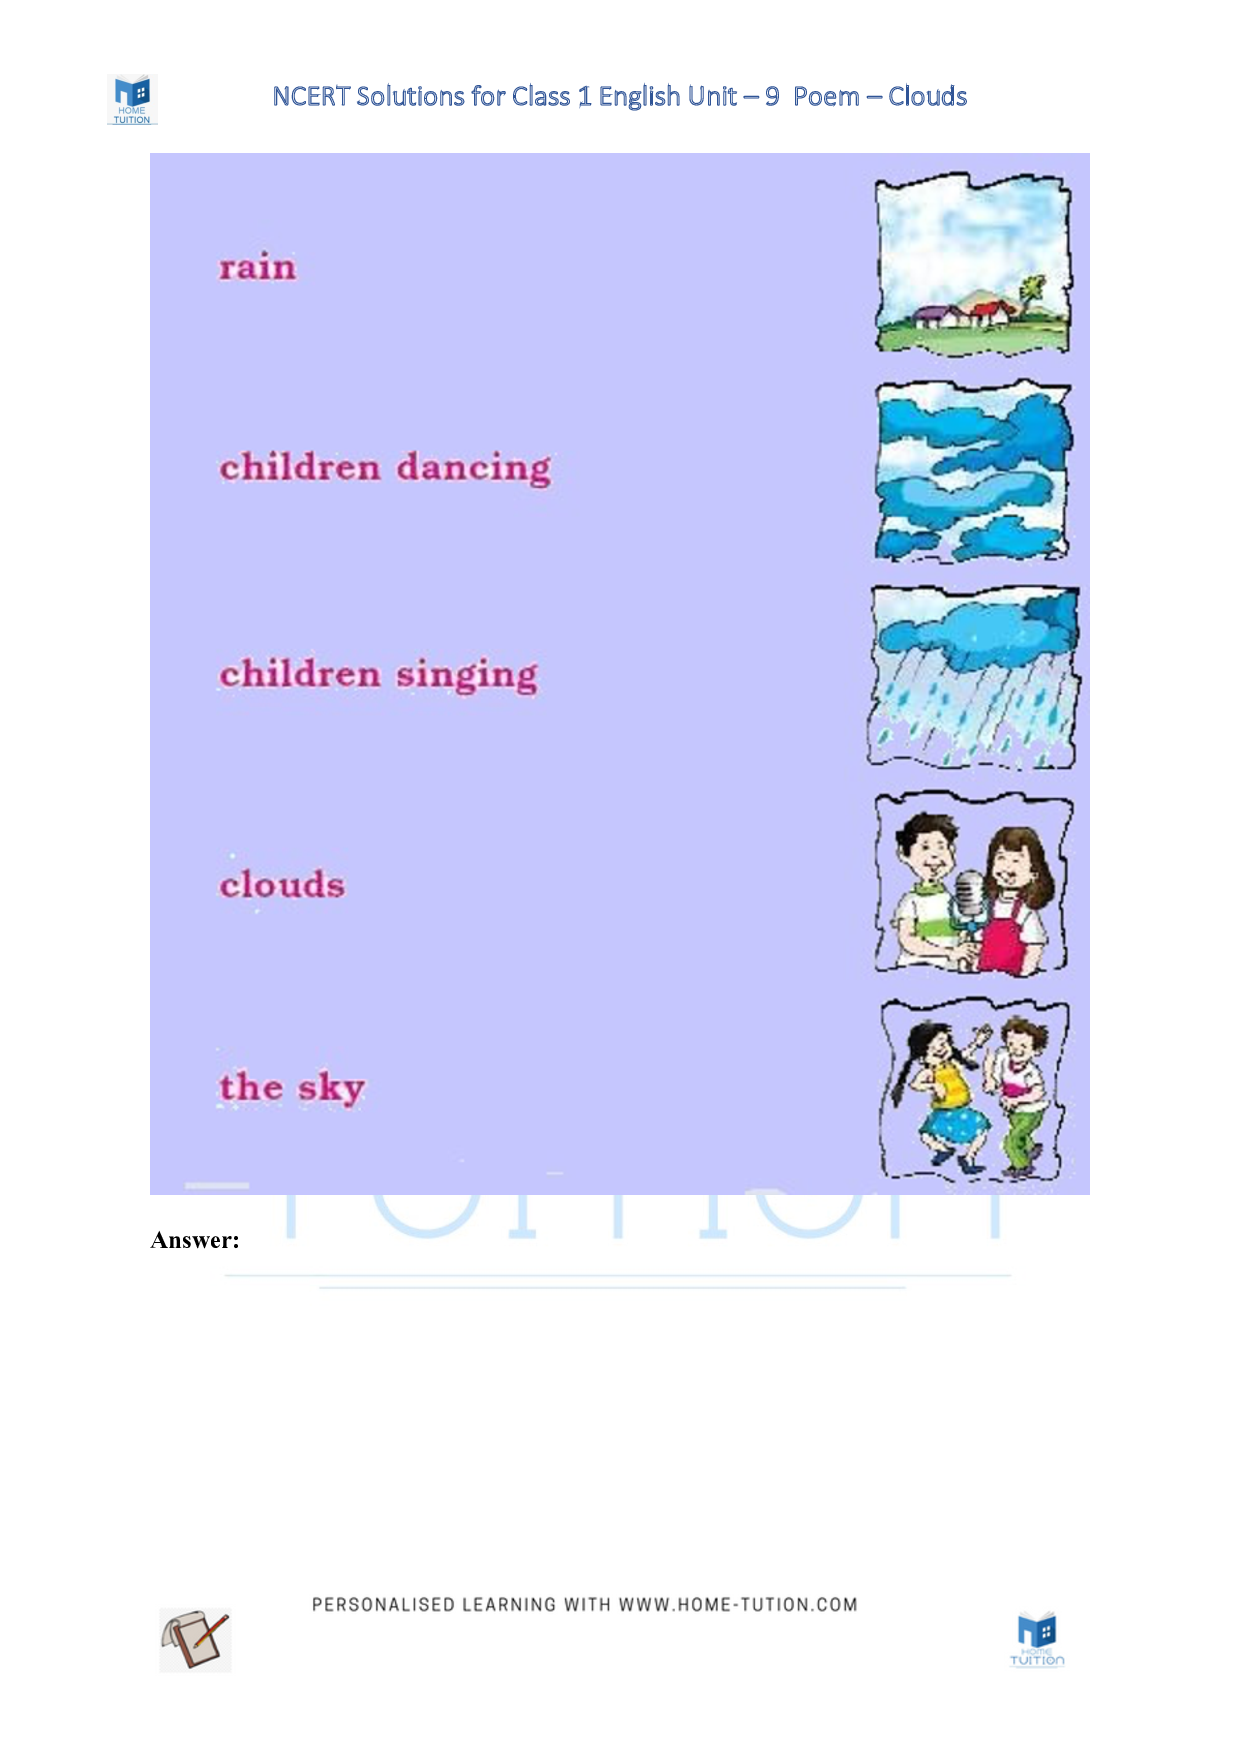 NCERT Solutions for Class 1 English Unit 9 Poem - Clouds